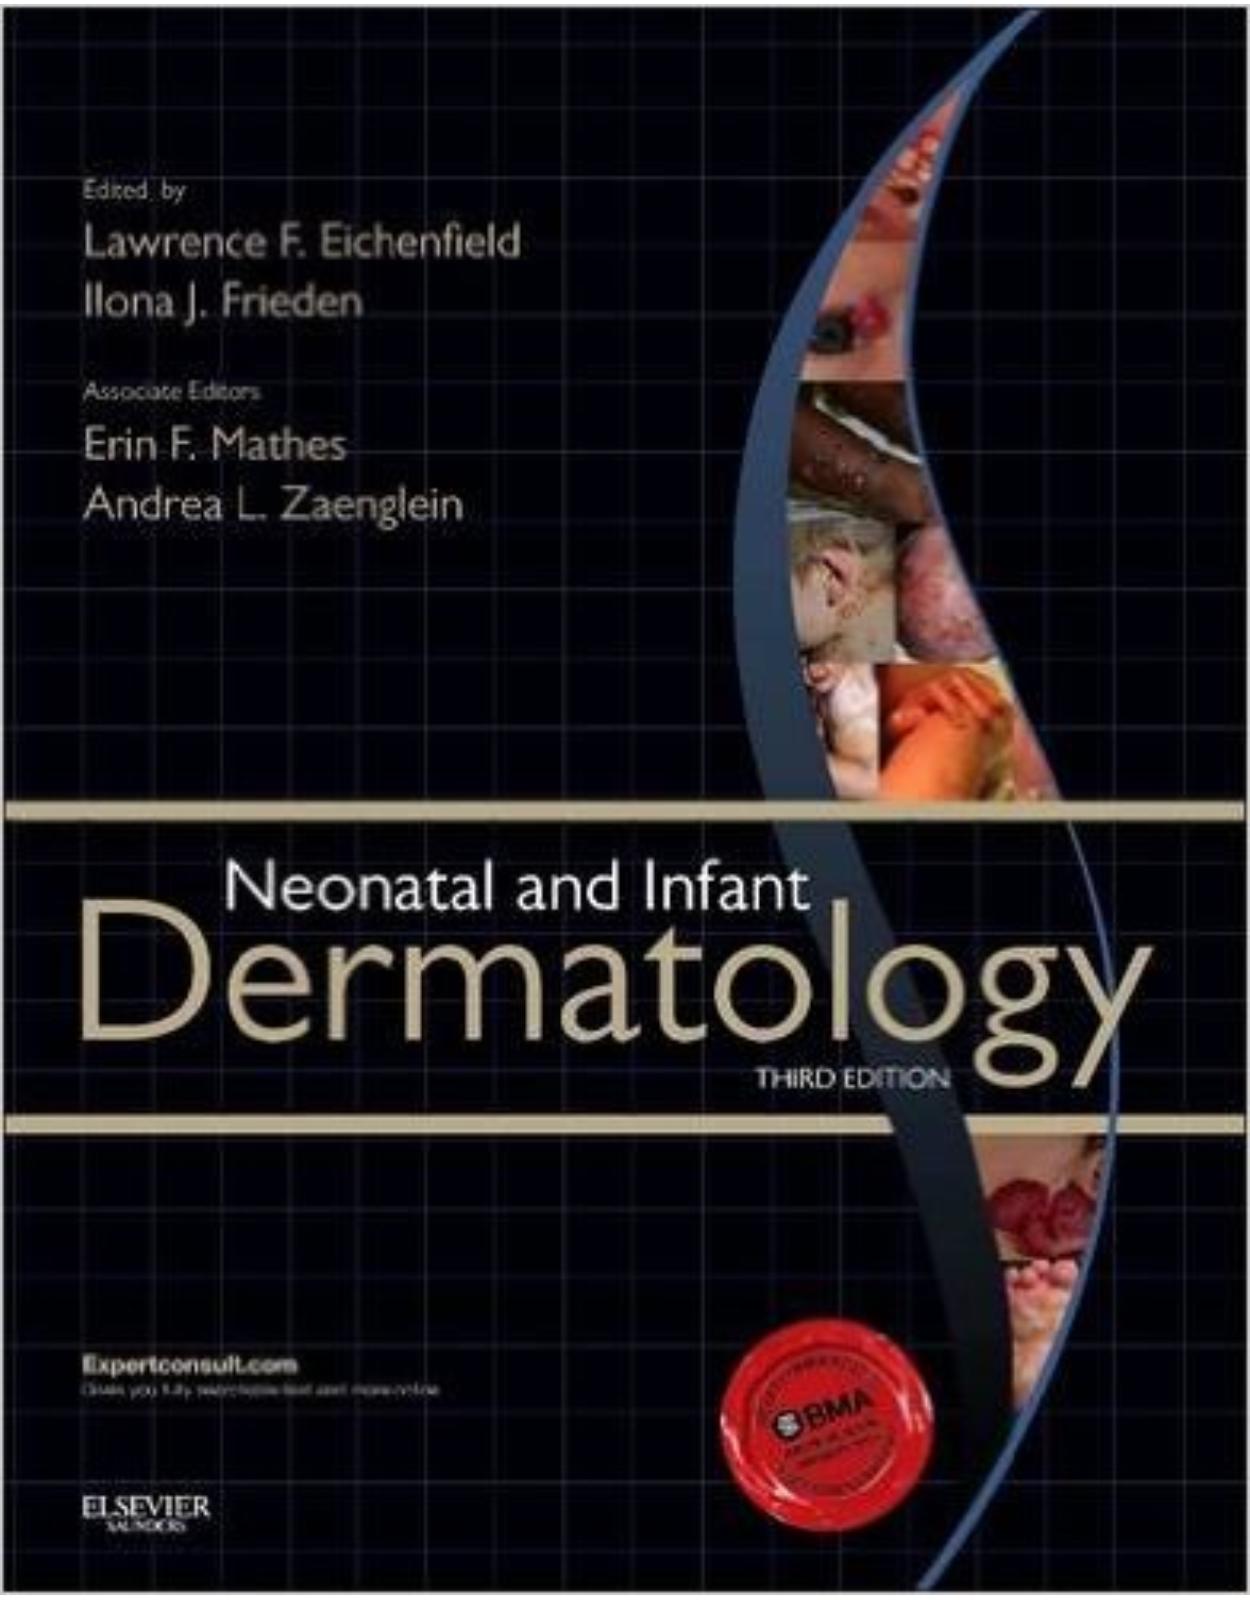 Neonatal and Infant Dermatology, 3rd Edition 